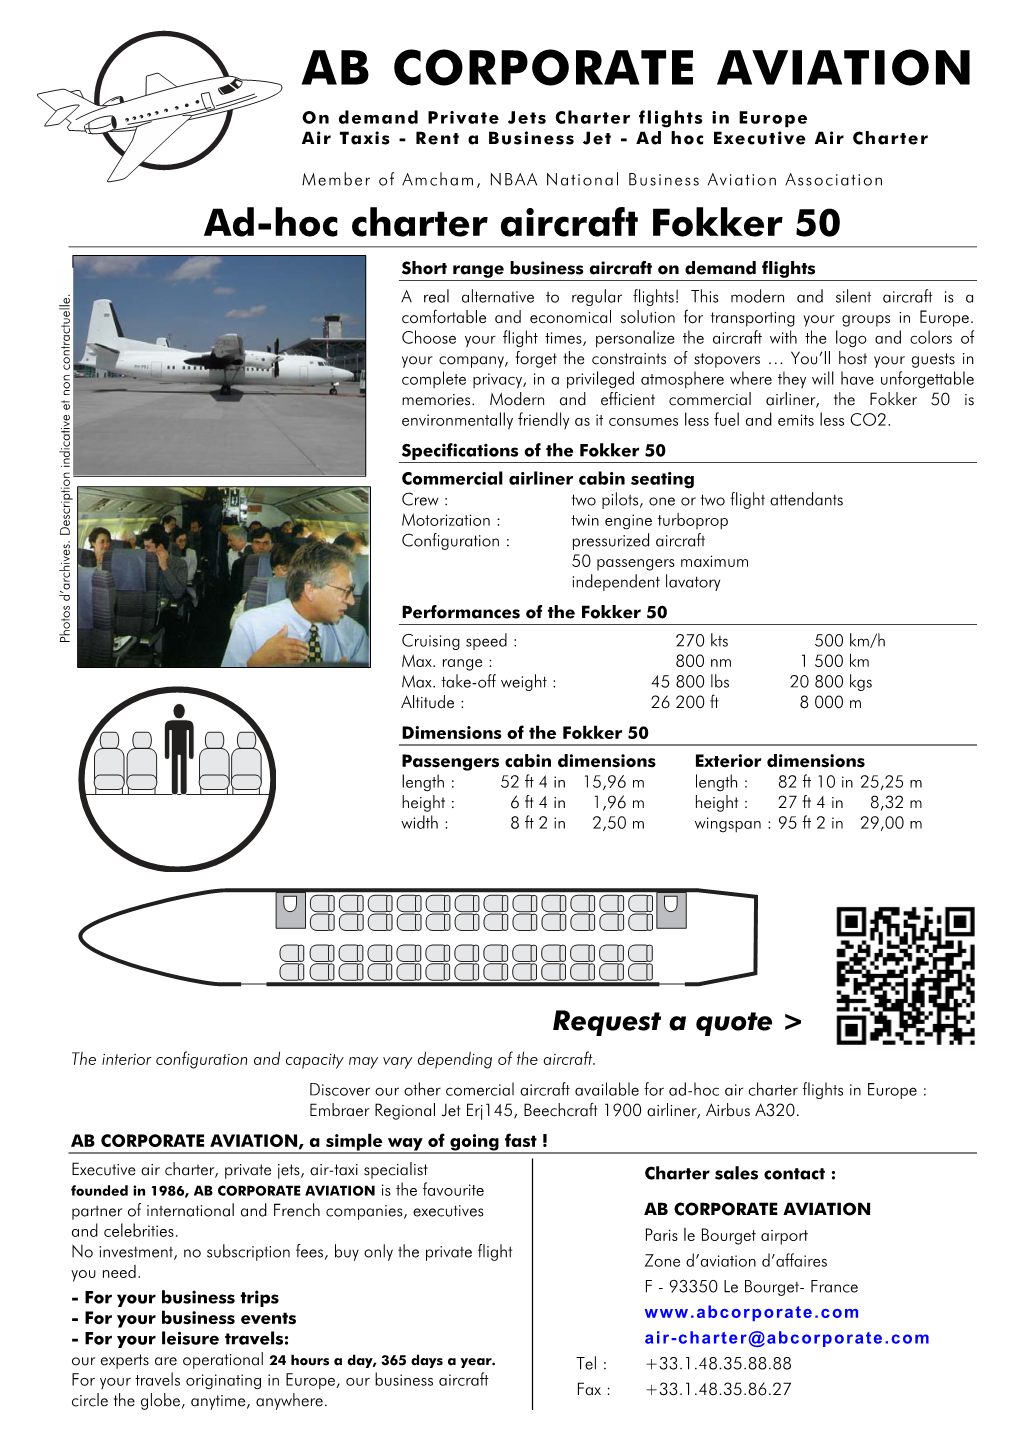 Fokker 50 Ad-Hoc Commercial Airliners Charter Flights in Europe